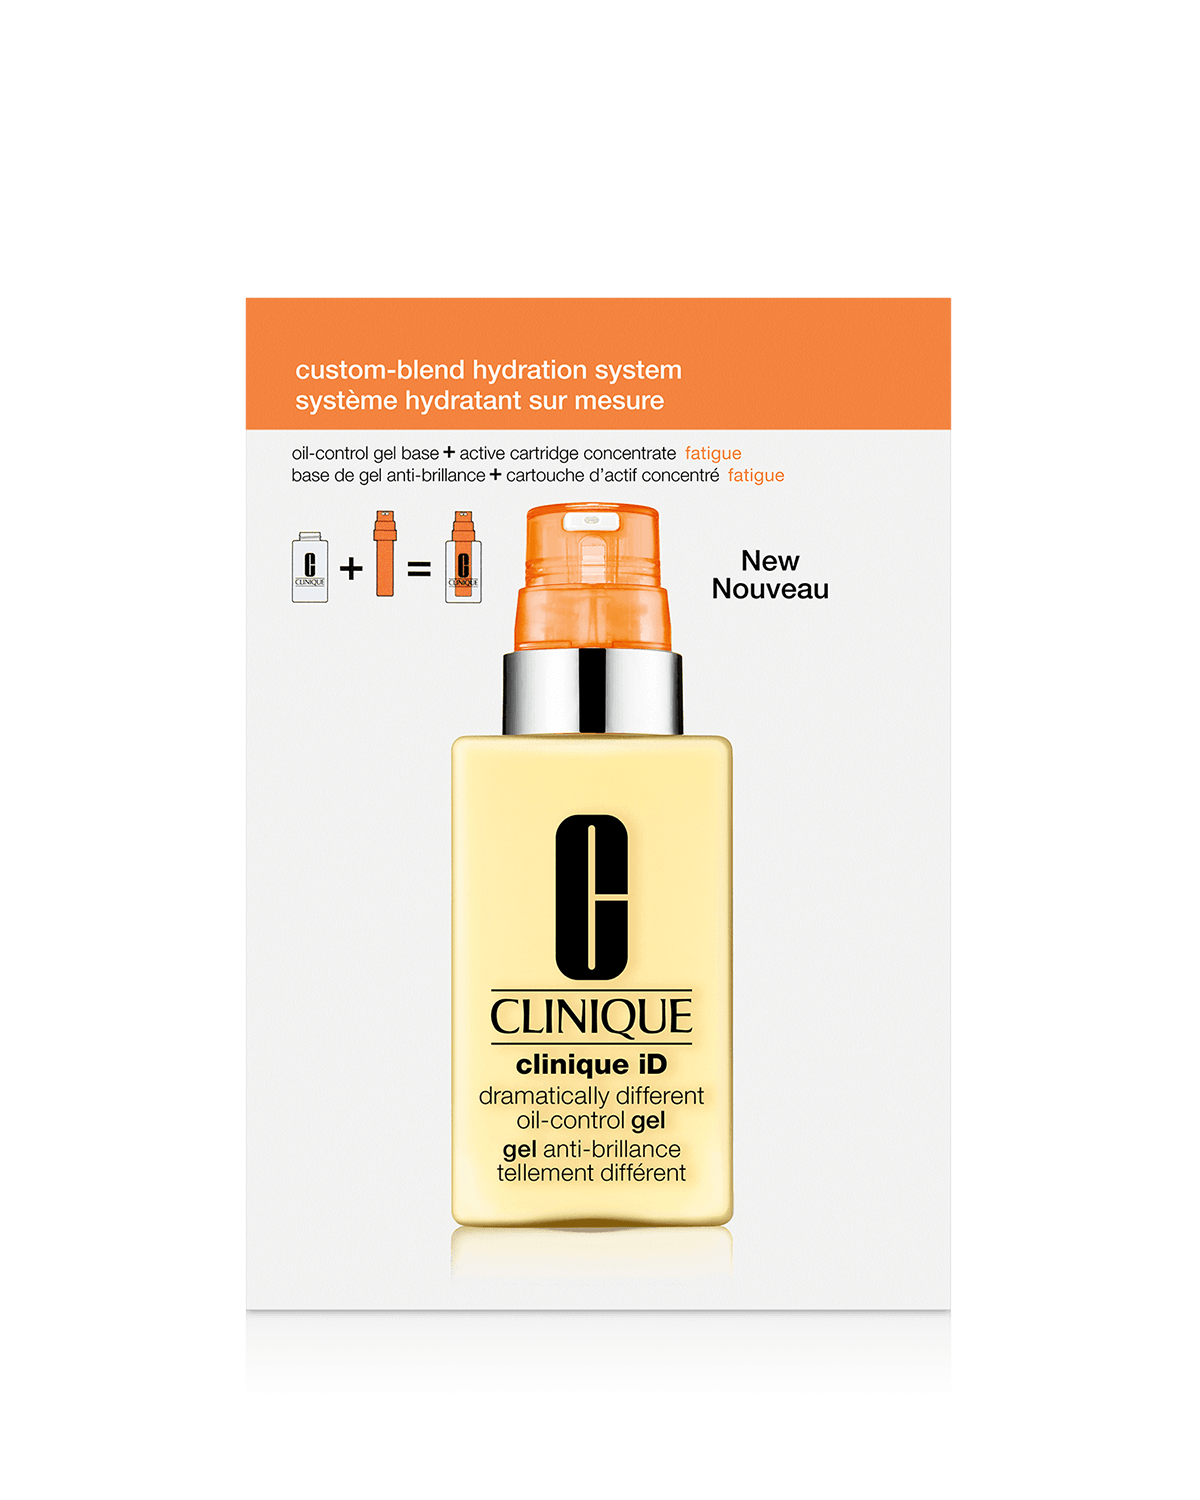 Clinique iD™: Active Cartridge Concentrate for Fatigue + Dramatically Different™ Moisturizing Gel